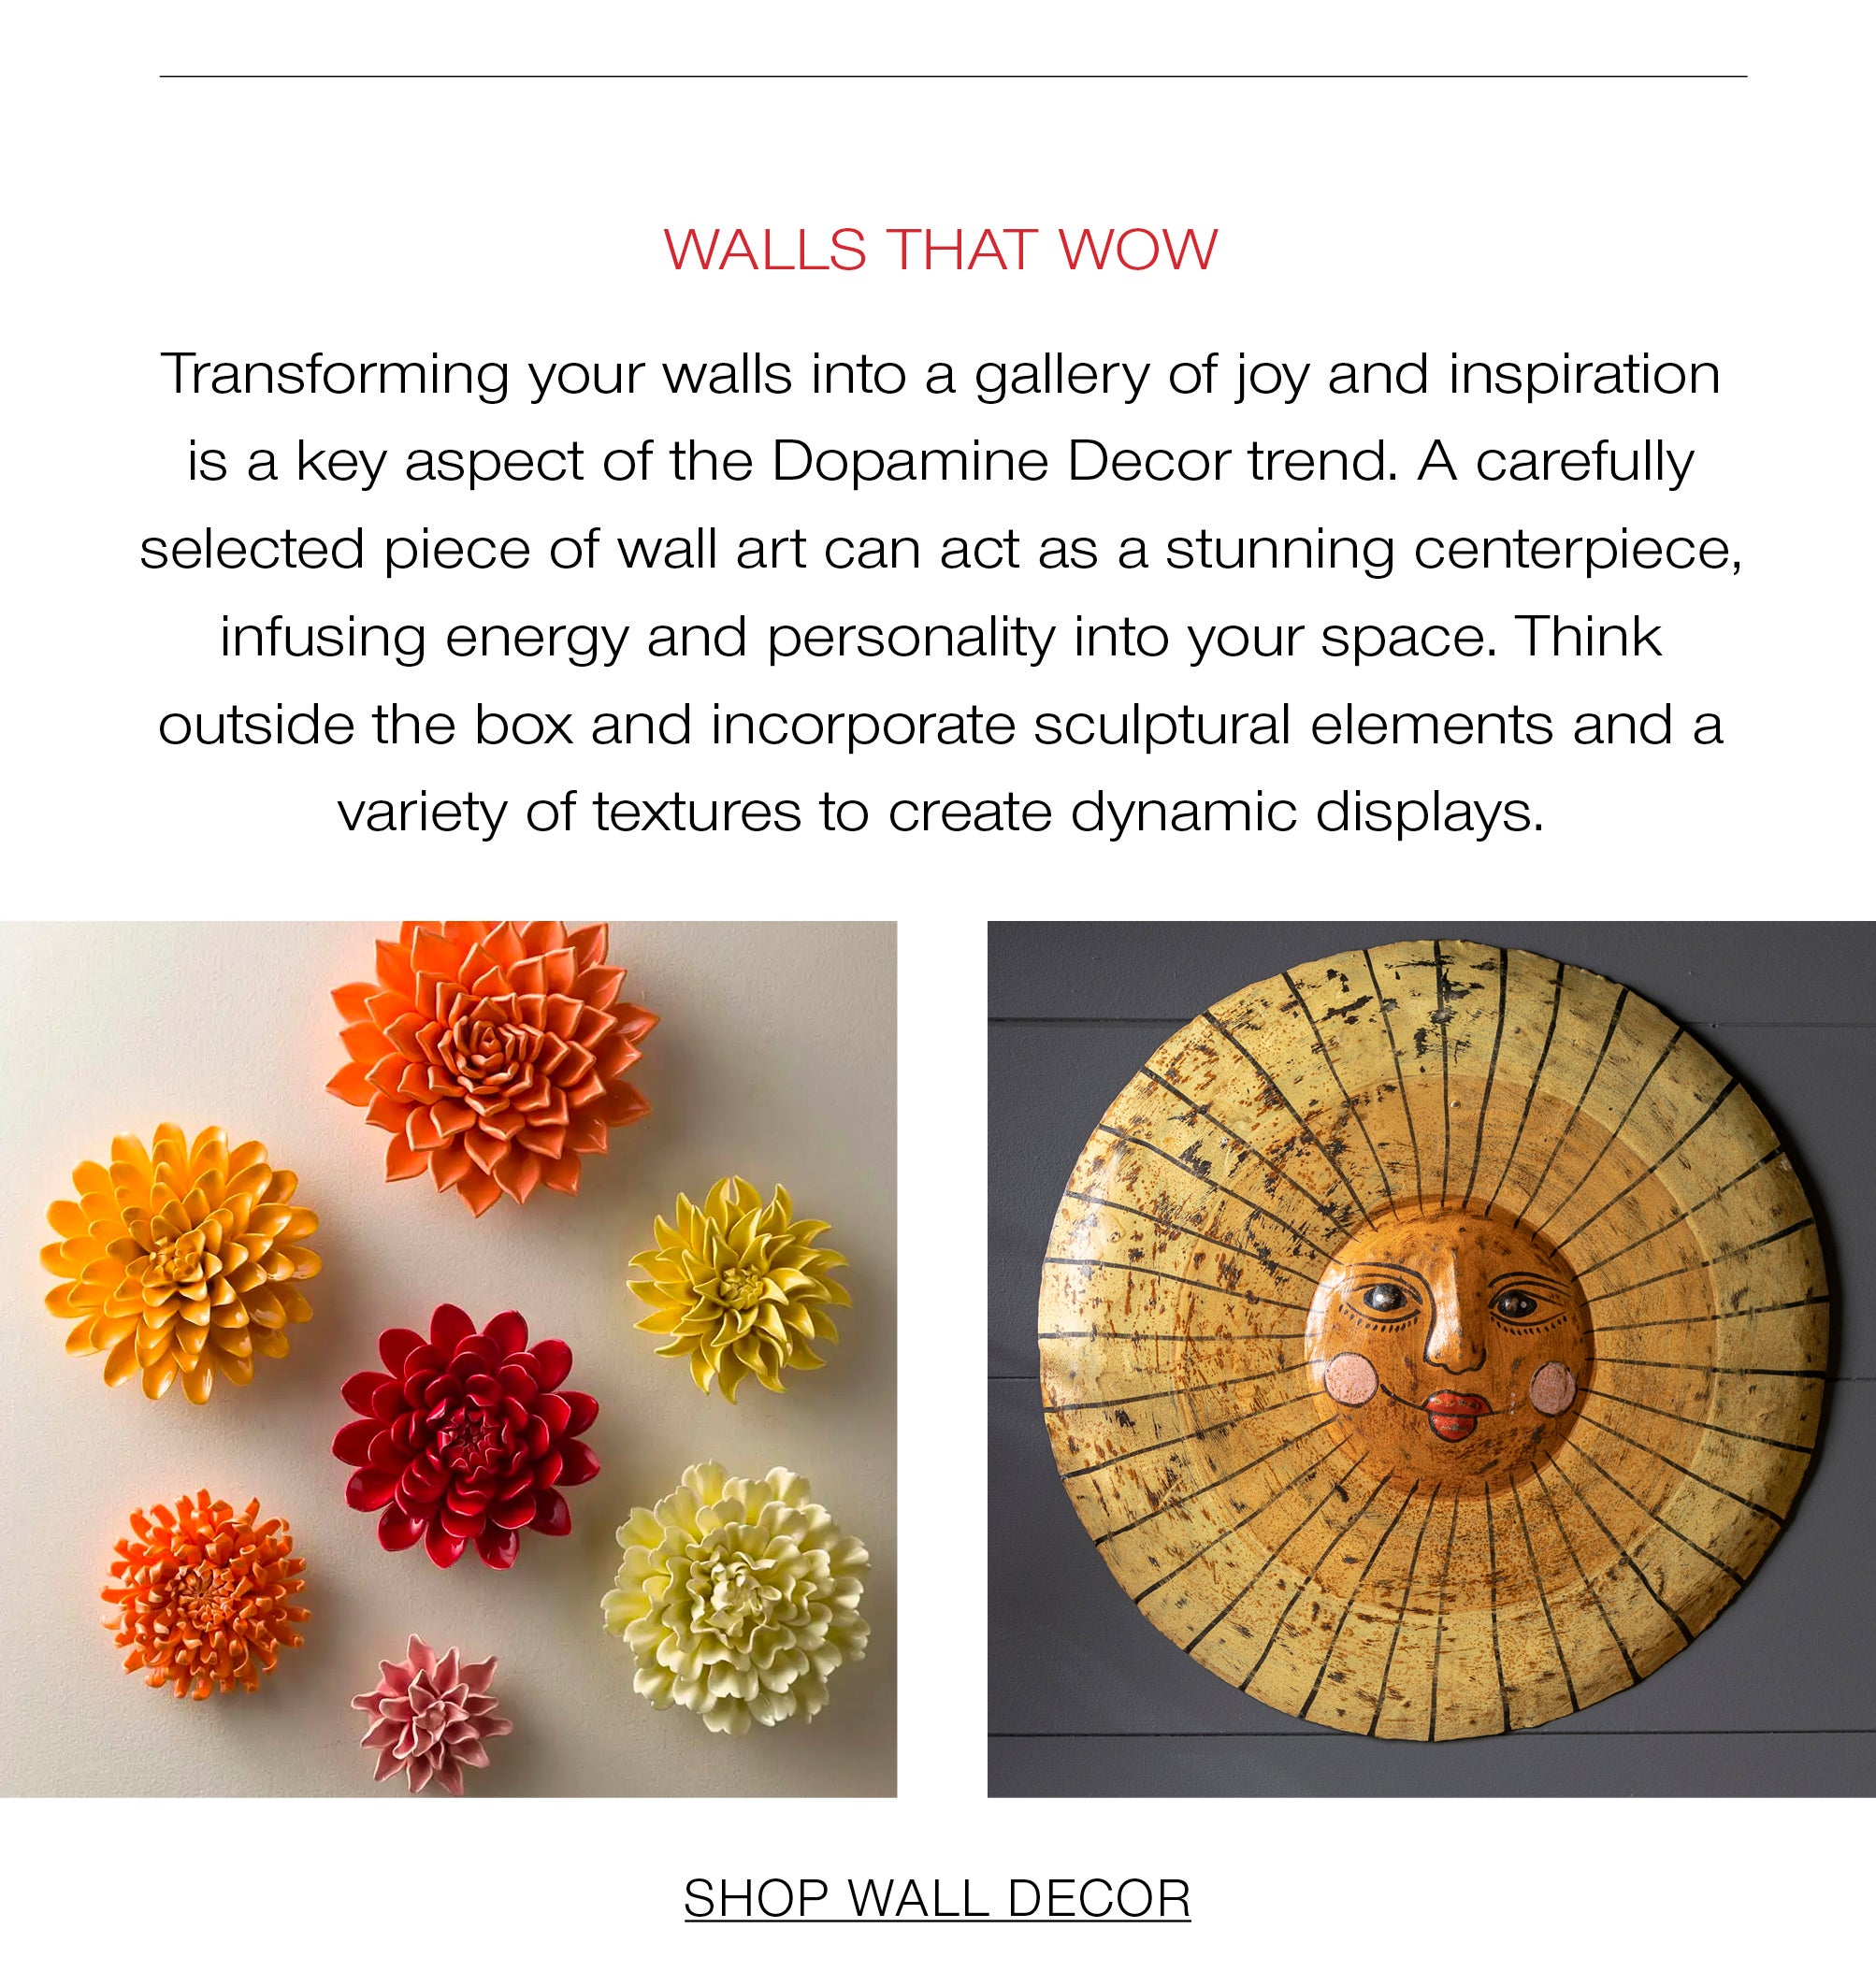 Walls that Wow<br />Transforming your walls into a gallery of joy and inspiration is a key aspect of the Dopamine Decor trend. A carefully selected piece of wall art can act as a stunning centerpiece, infusing energy and personality into your space. Think outside the box and incorporate sculptural elements and a variety of textures to create dynamic displays.